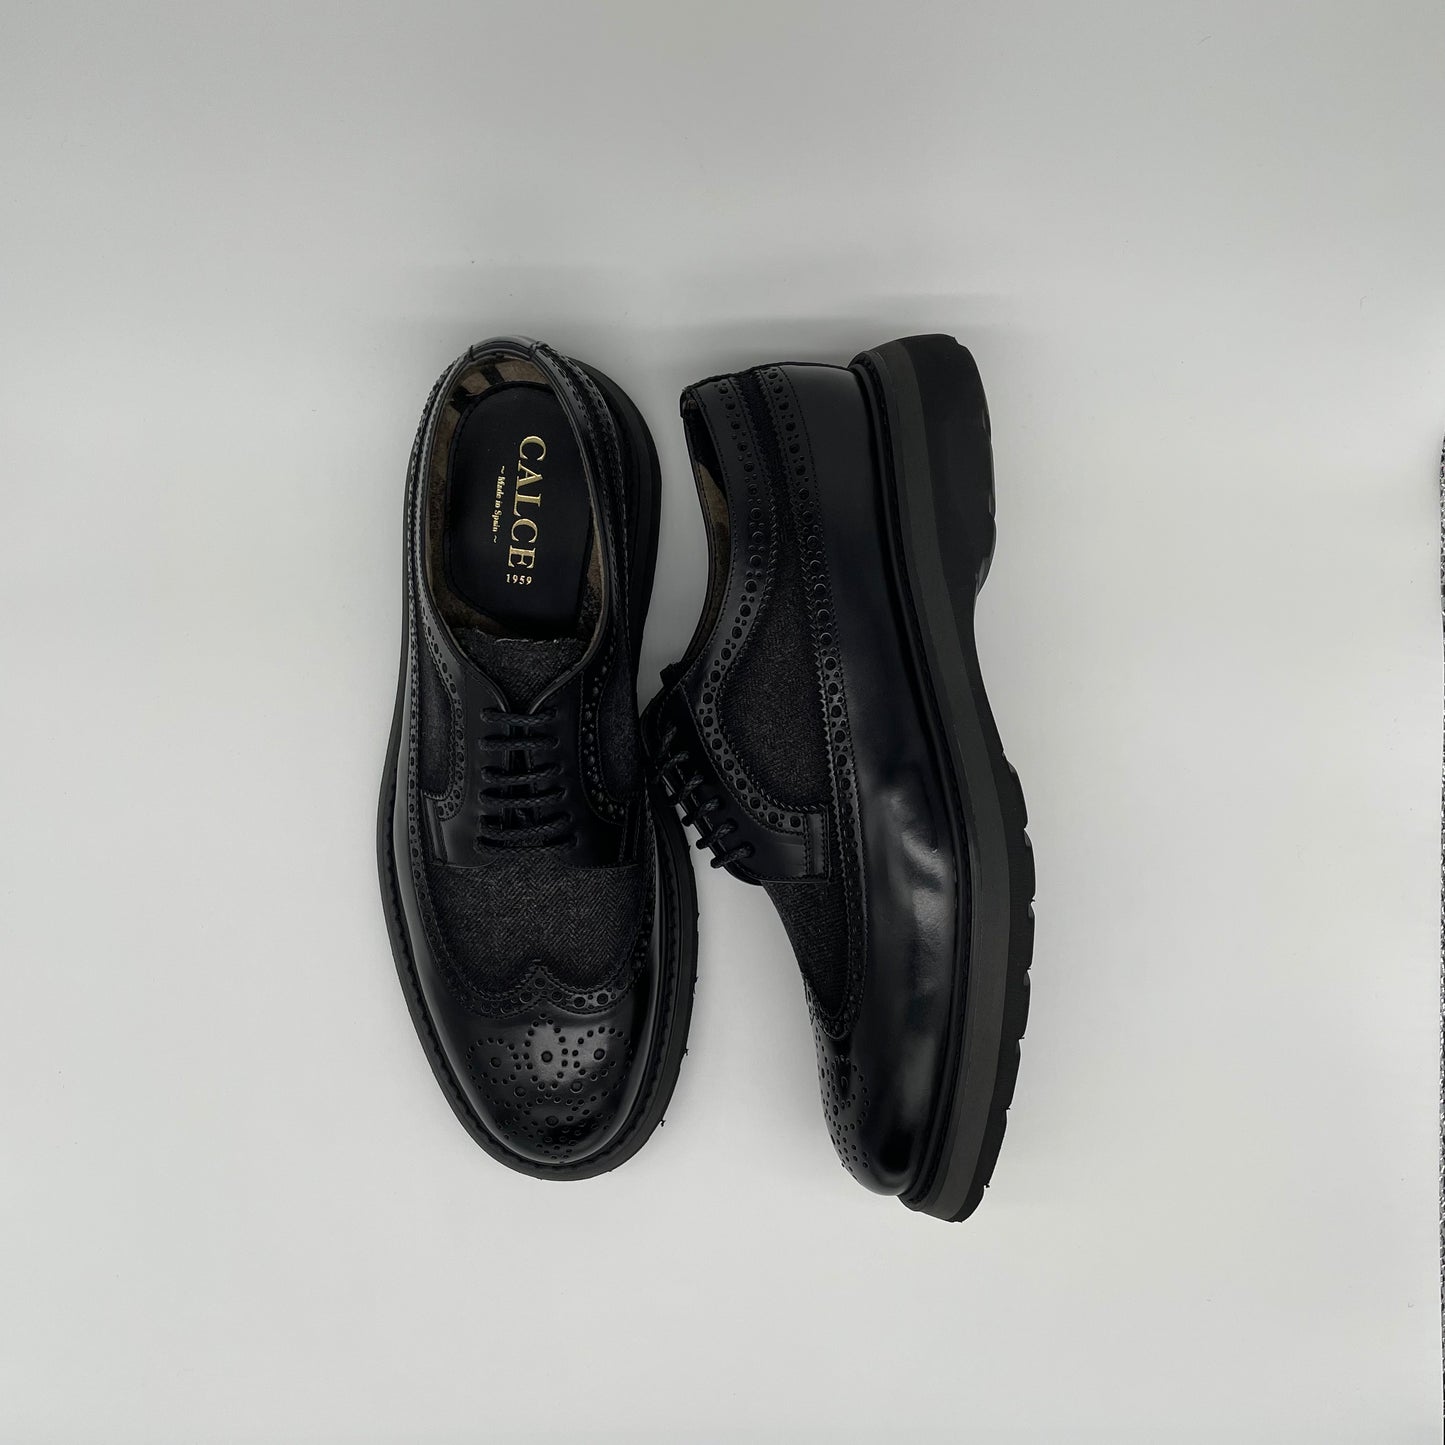 Calce Leather Shoes - Oxford Brogue Nappa Leather